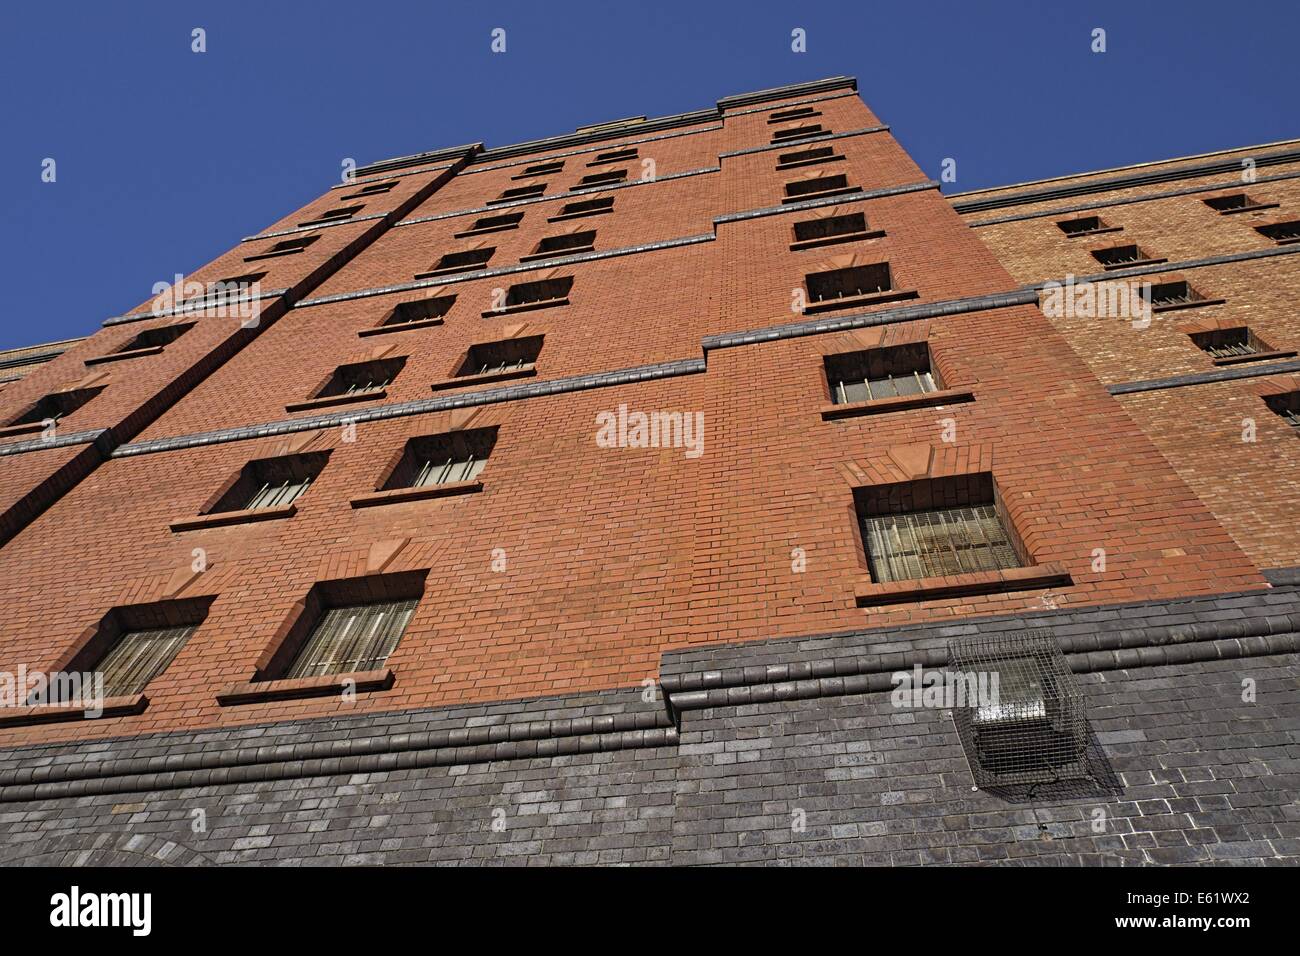 One of several old customs warehouses in the city of Bristol old dock area ,viewed upwards showing a blue sky above. Stock Photo